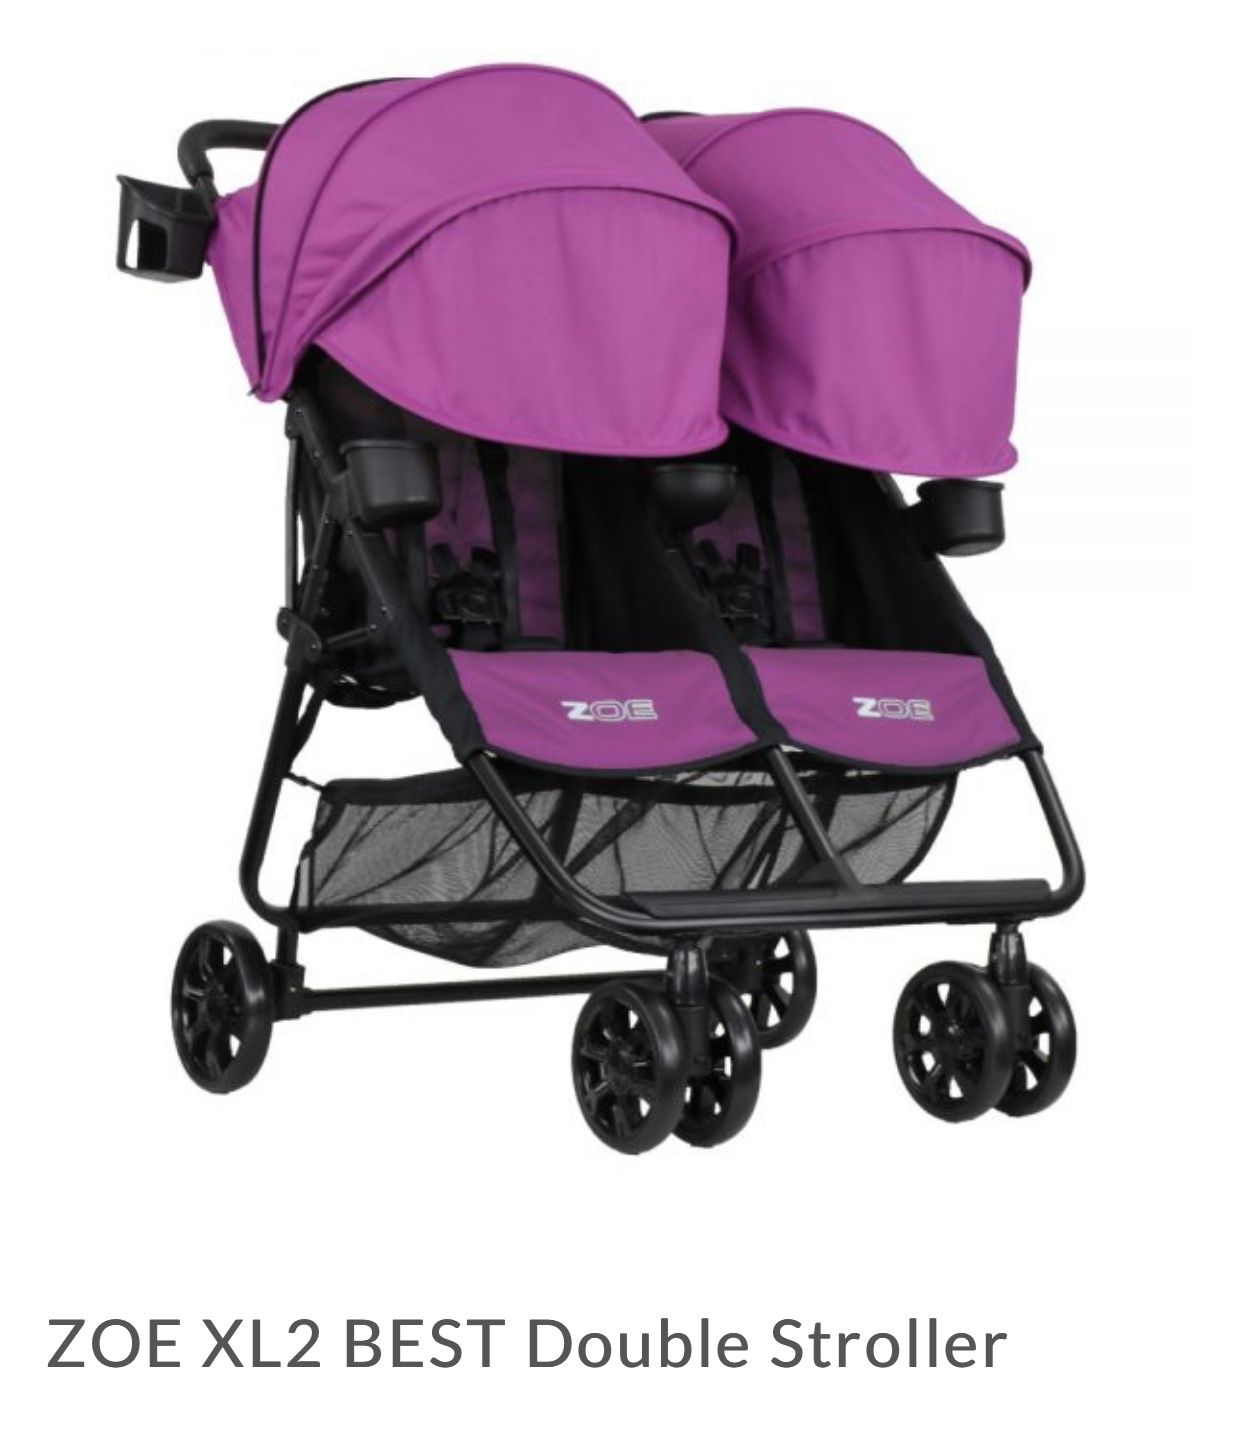 Zoe double stroller, extremely light!